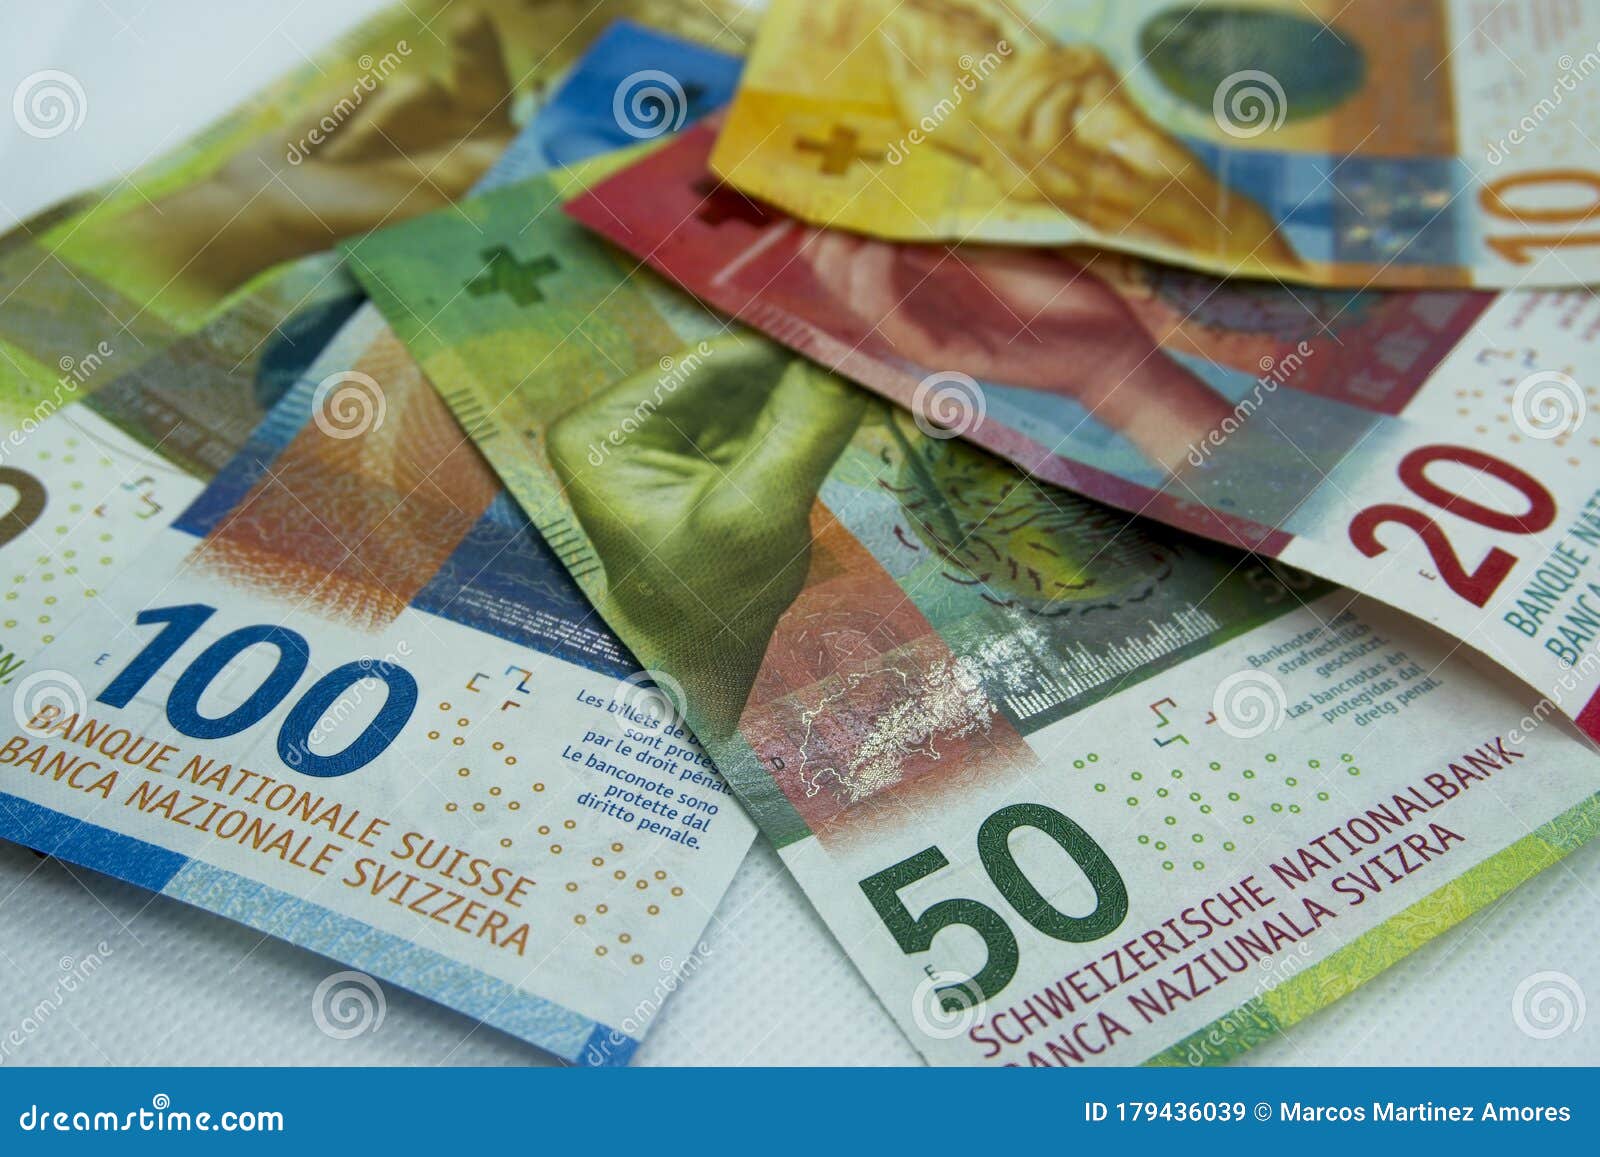 swiss-money-and-currency-of-switzerland-swiss-francs-stock-image